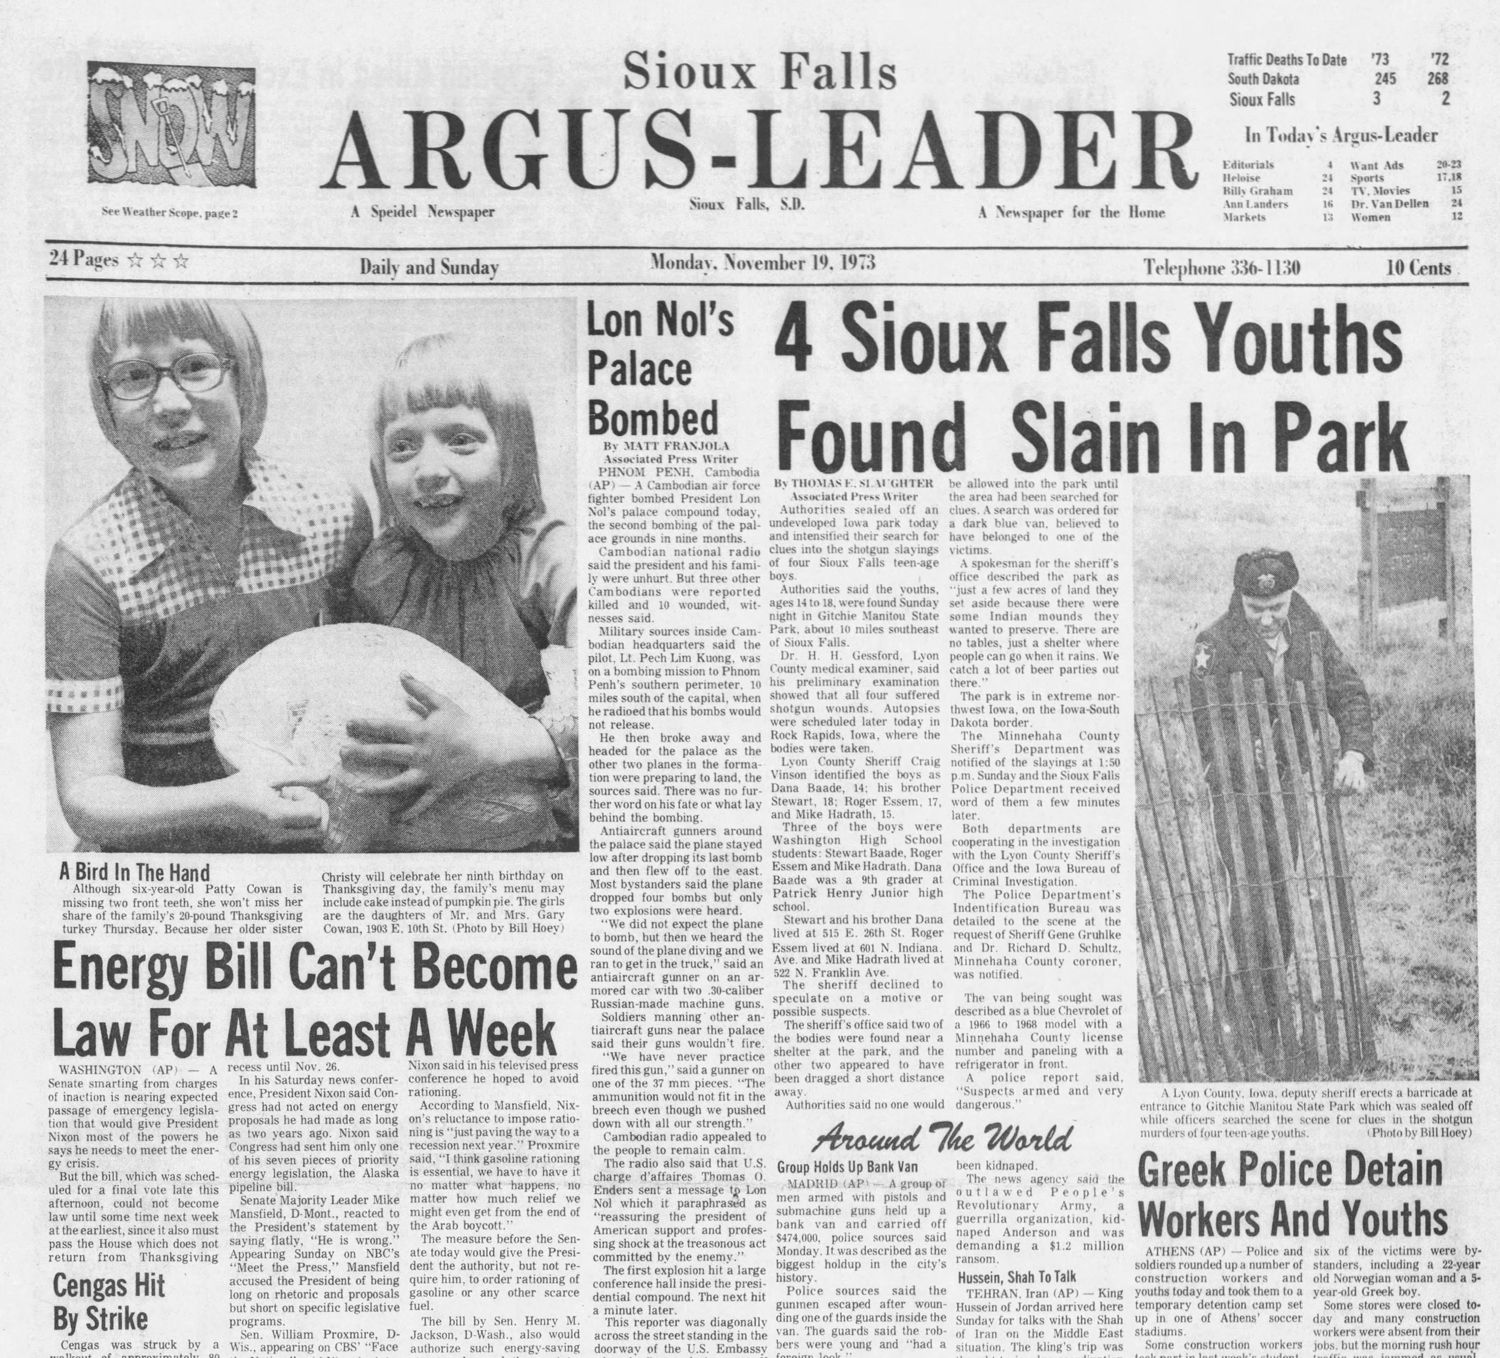 Argus Leader front page from Nov. 19, 1973 covering the Gitchie Manitou murders